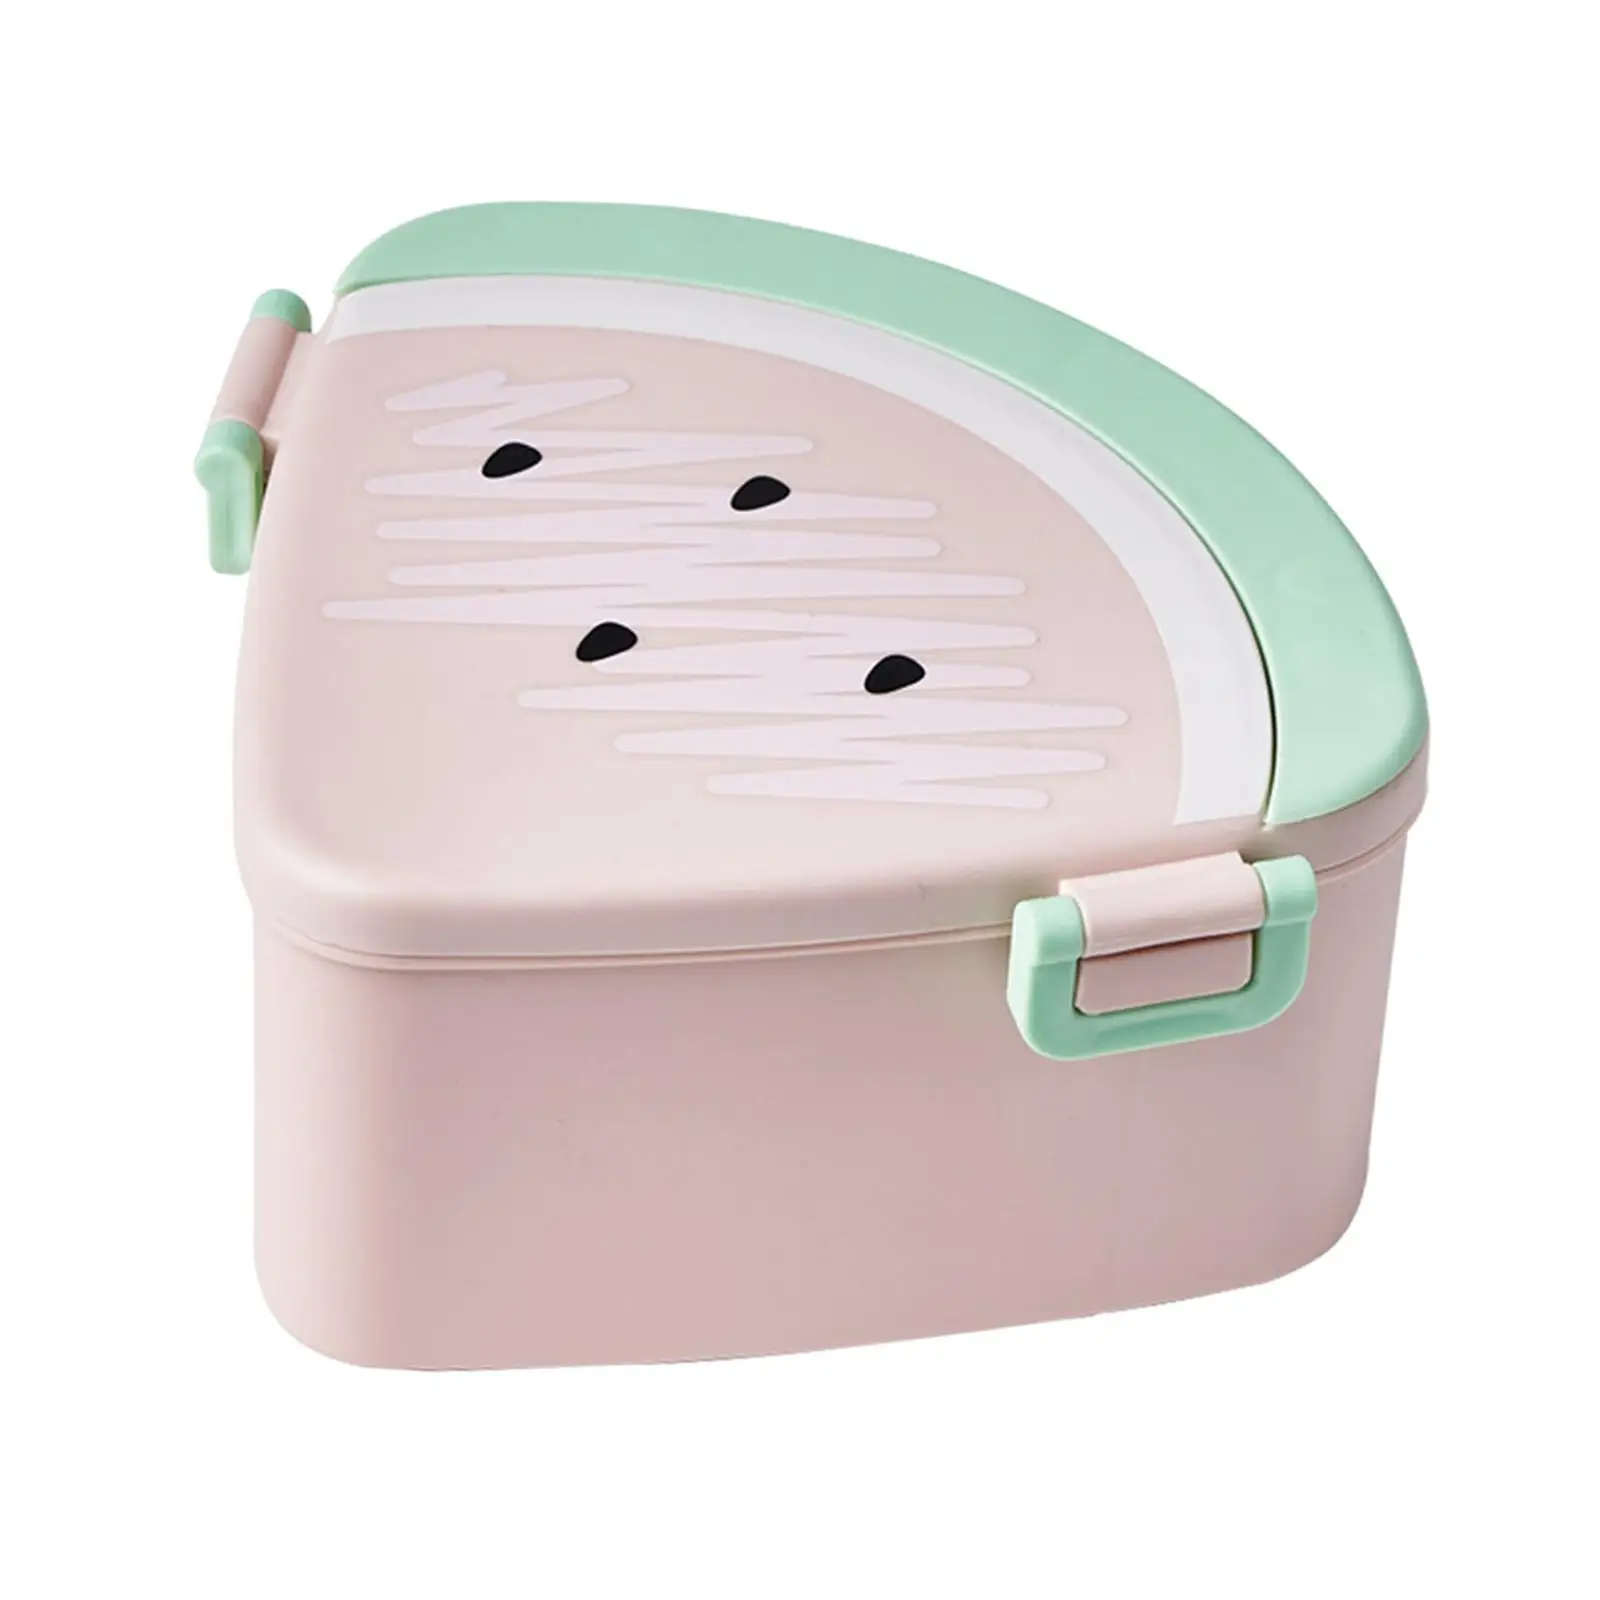 Lunch Container Microwave Safe Leakproof Lunch Box for Picnic School Work